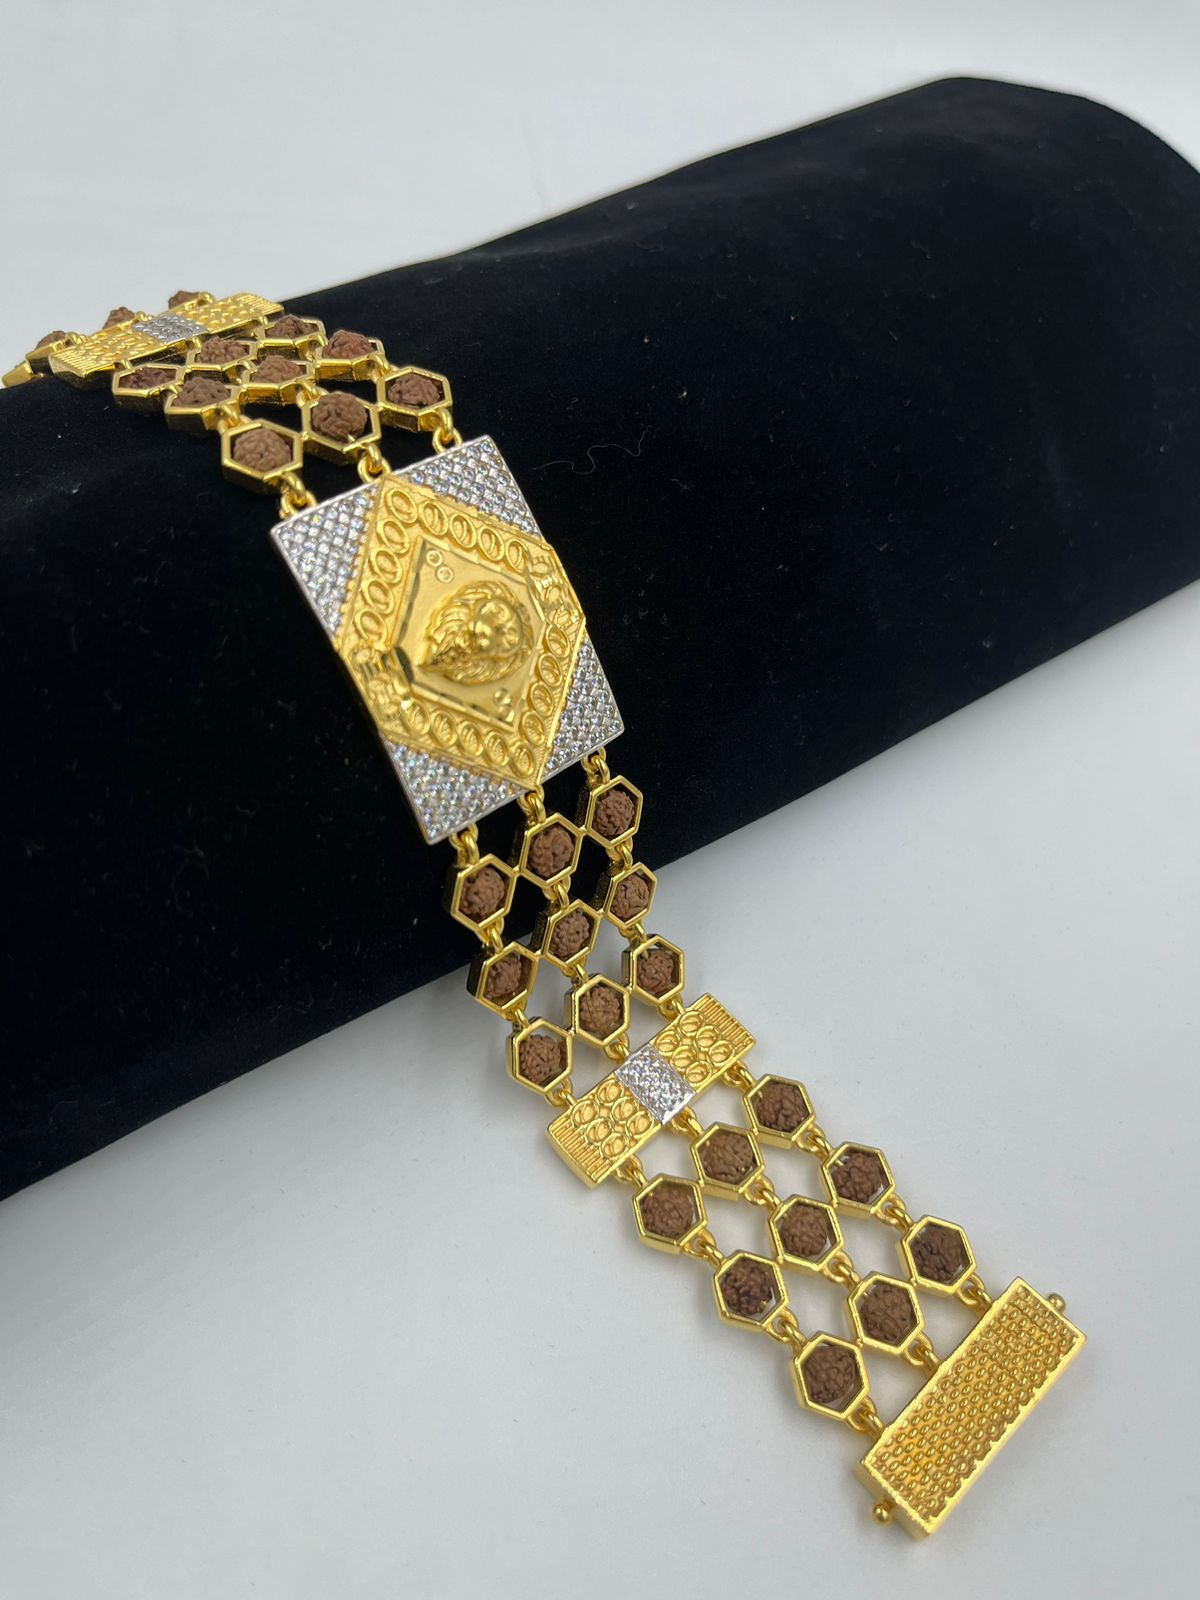 10 Beautiful Designs of 4 Gram Gold Bangles For Stunning Look